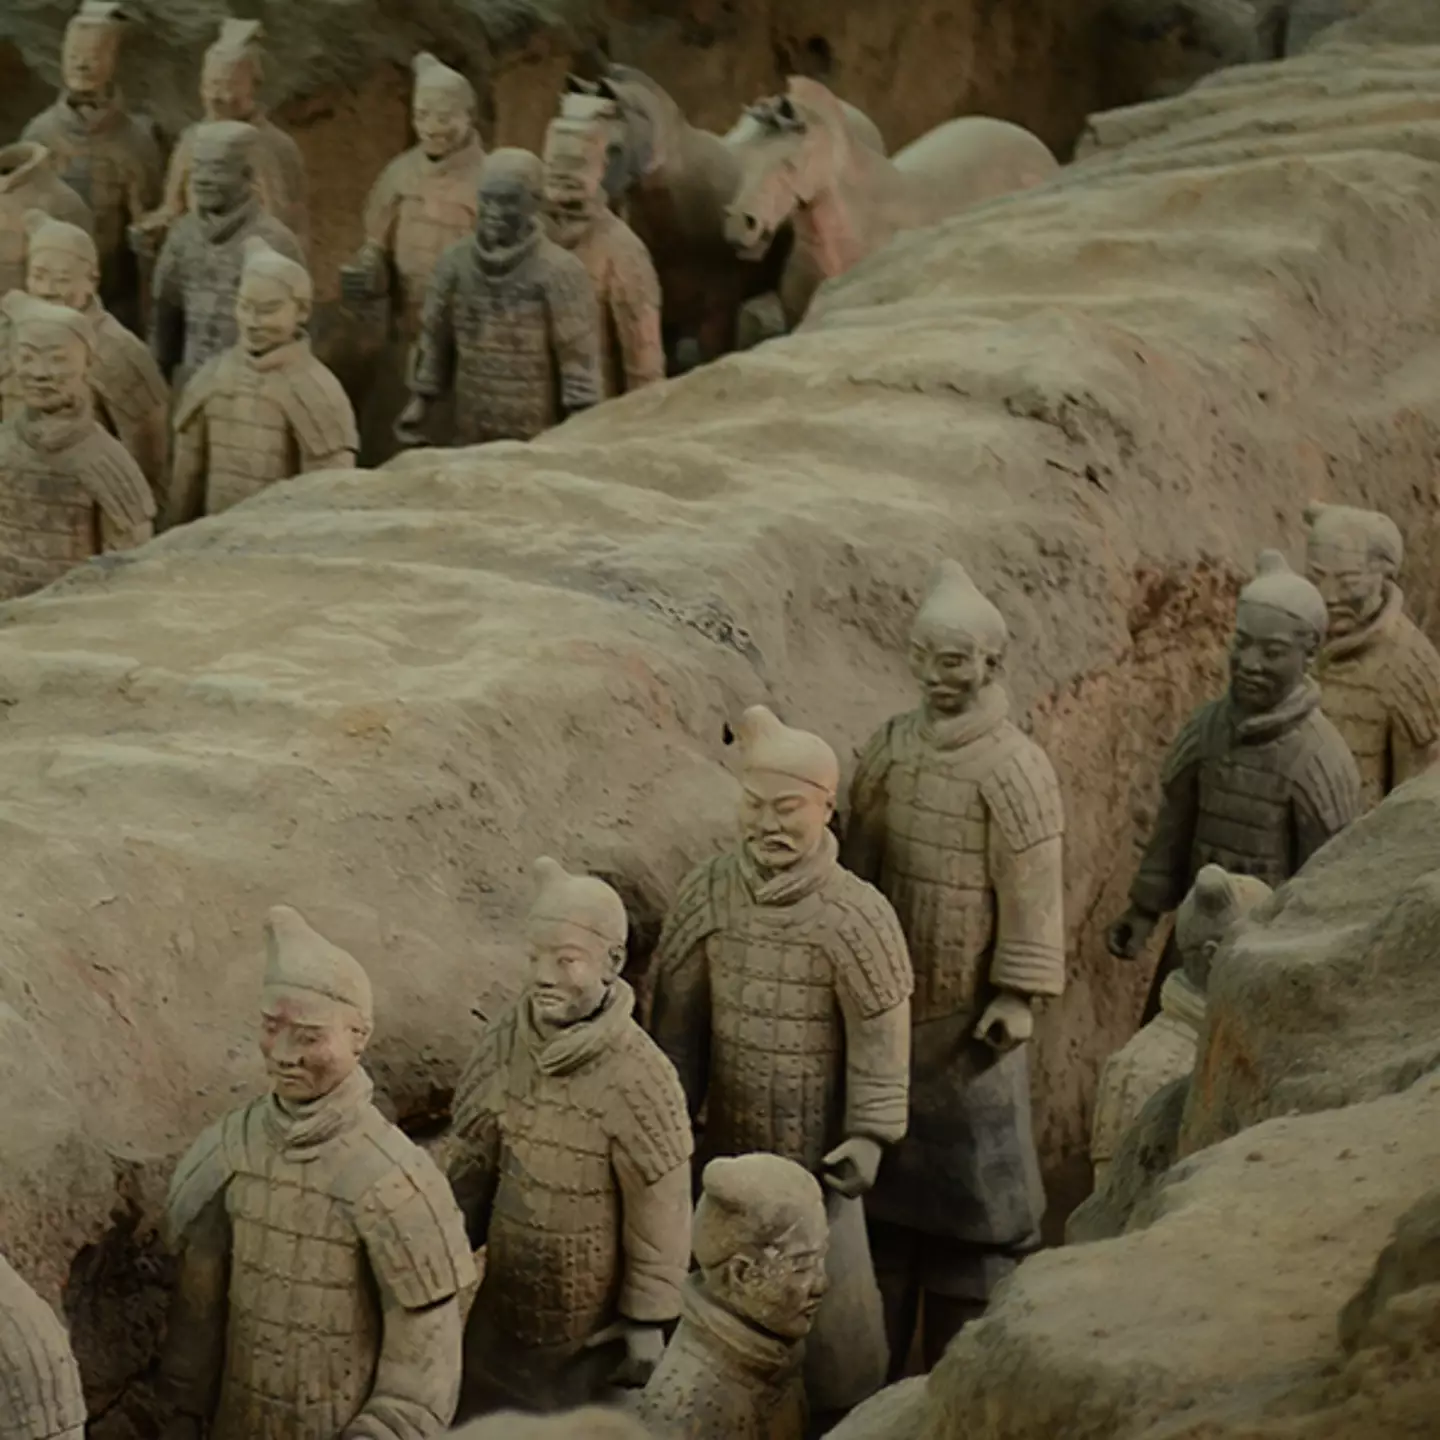 Archaeologists are terrified to open up the tomb of China’s first emperor